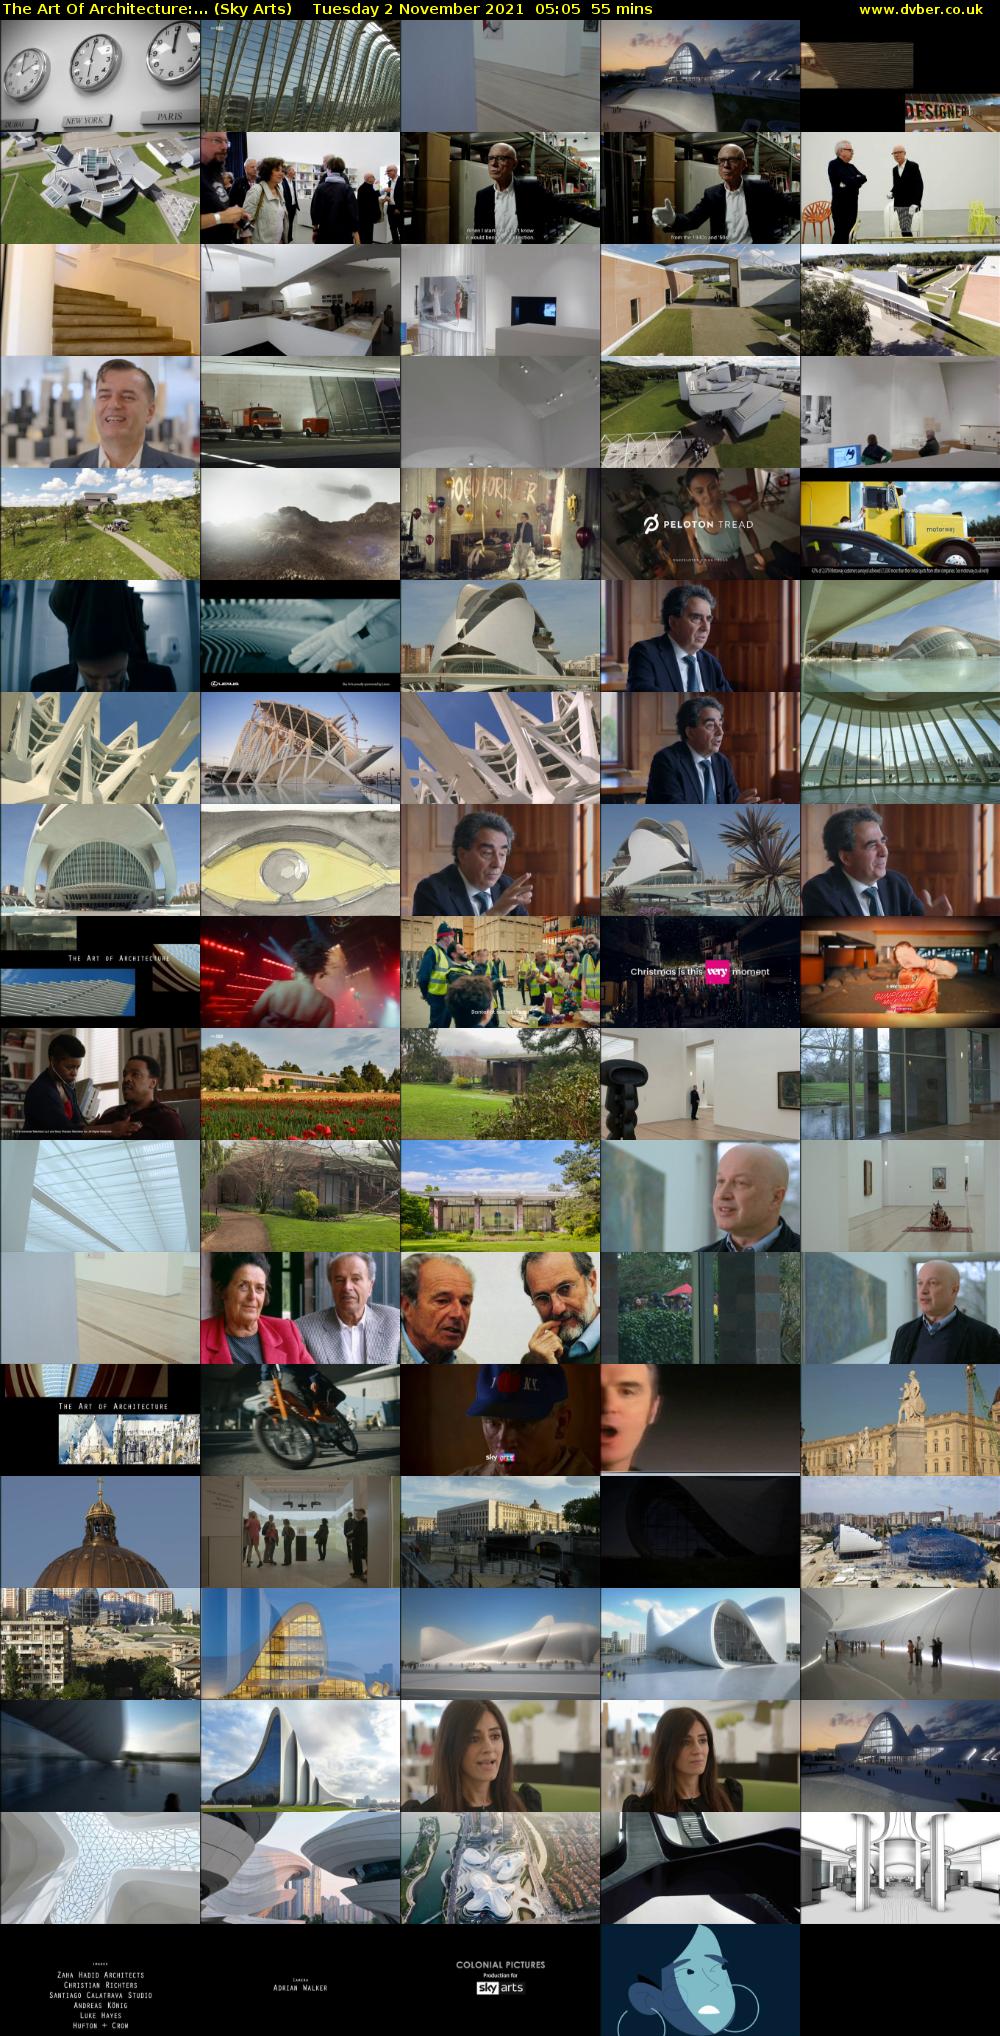 The Art Of Architecture:... (Sky Arts) Tuesday 2 November 2021 05:05 - 06:00